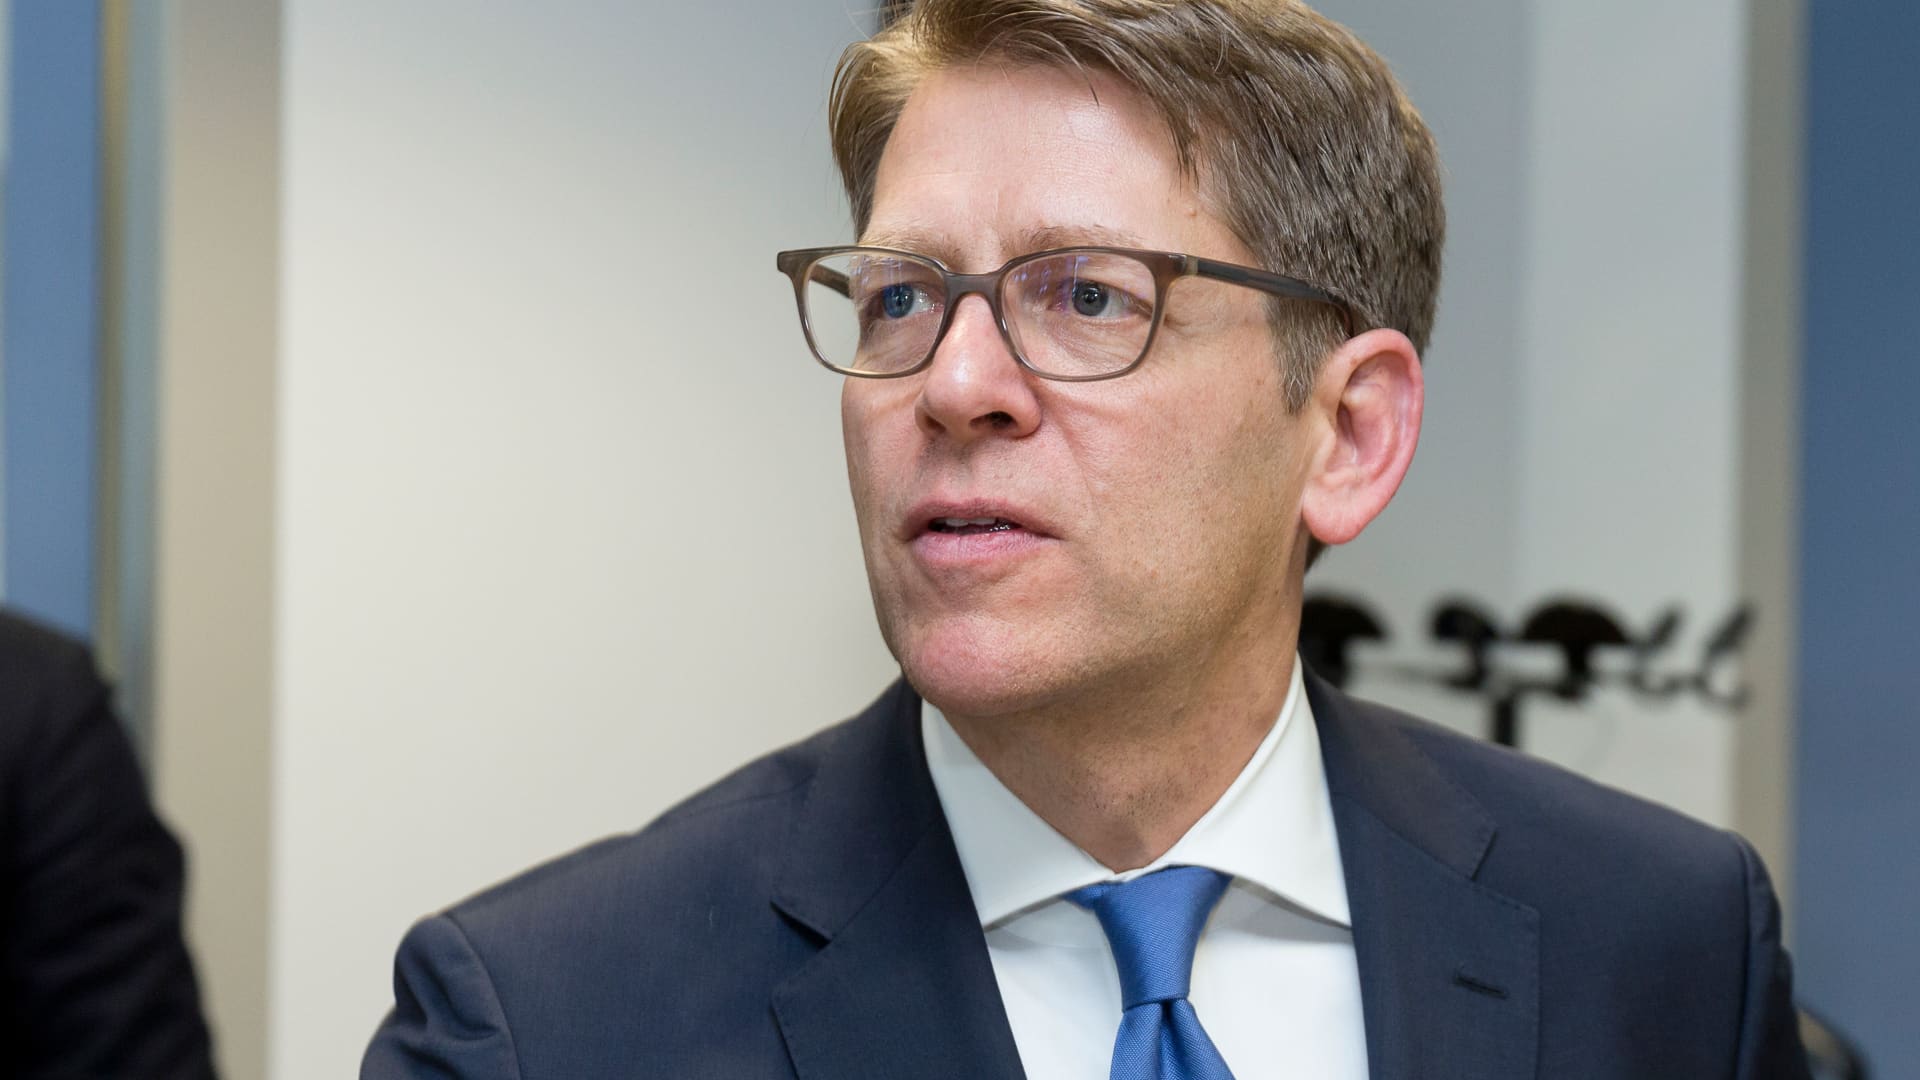 Amazon’s PR and policy chief Jay Carney leaves to join Airbnb